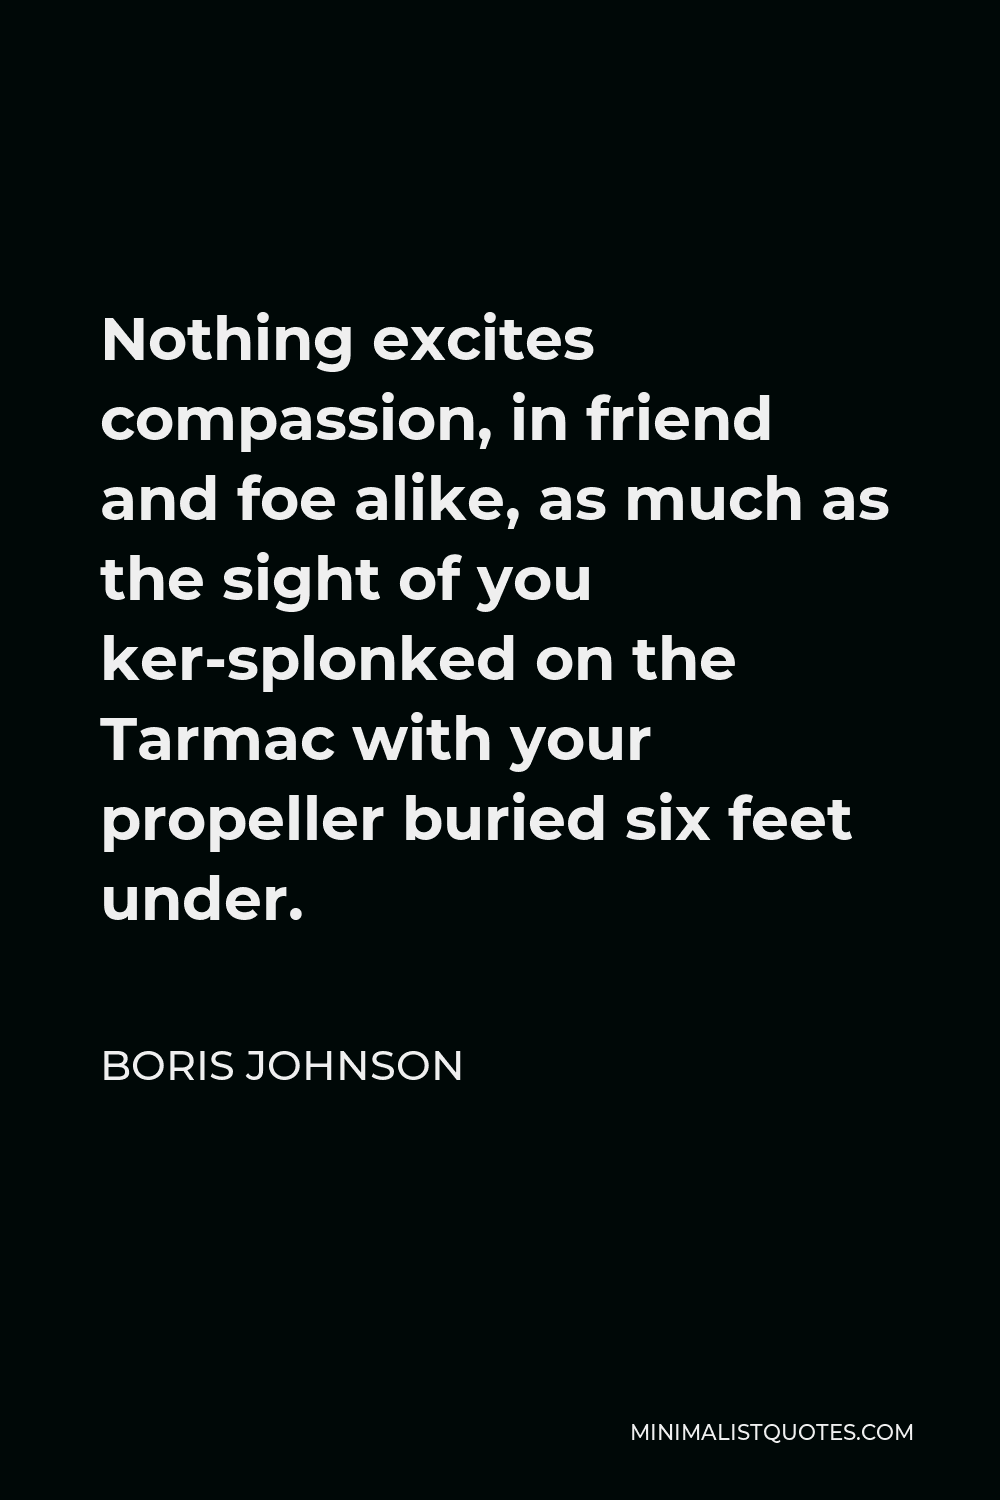 Boris Johnson Quote - Nothing excites compassion, in friend and foe alike, as much as the sight of you ker-splonked on the Tarmac with your propeller buried six feet under.